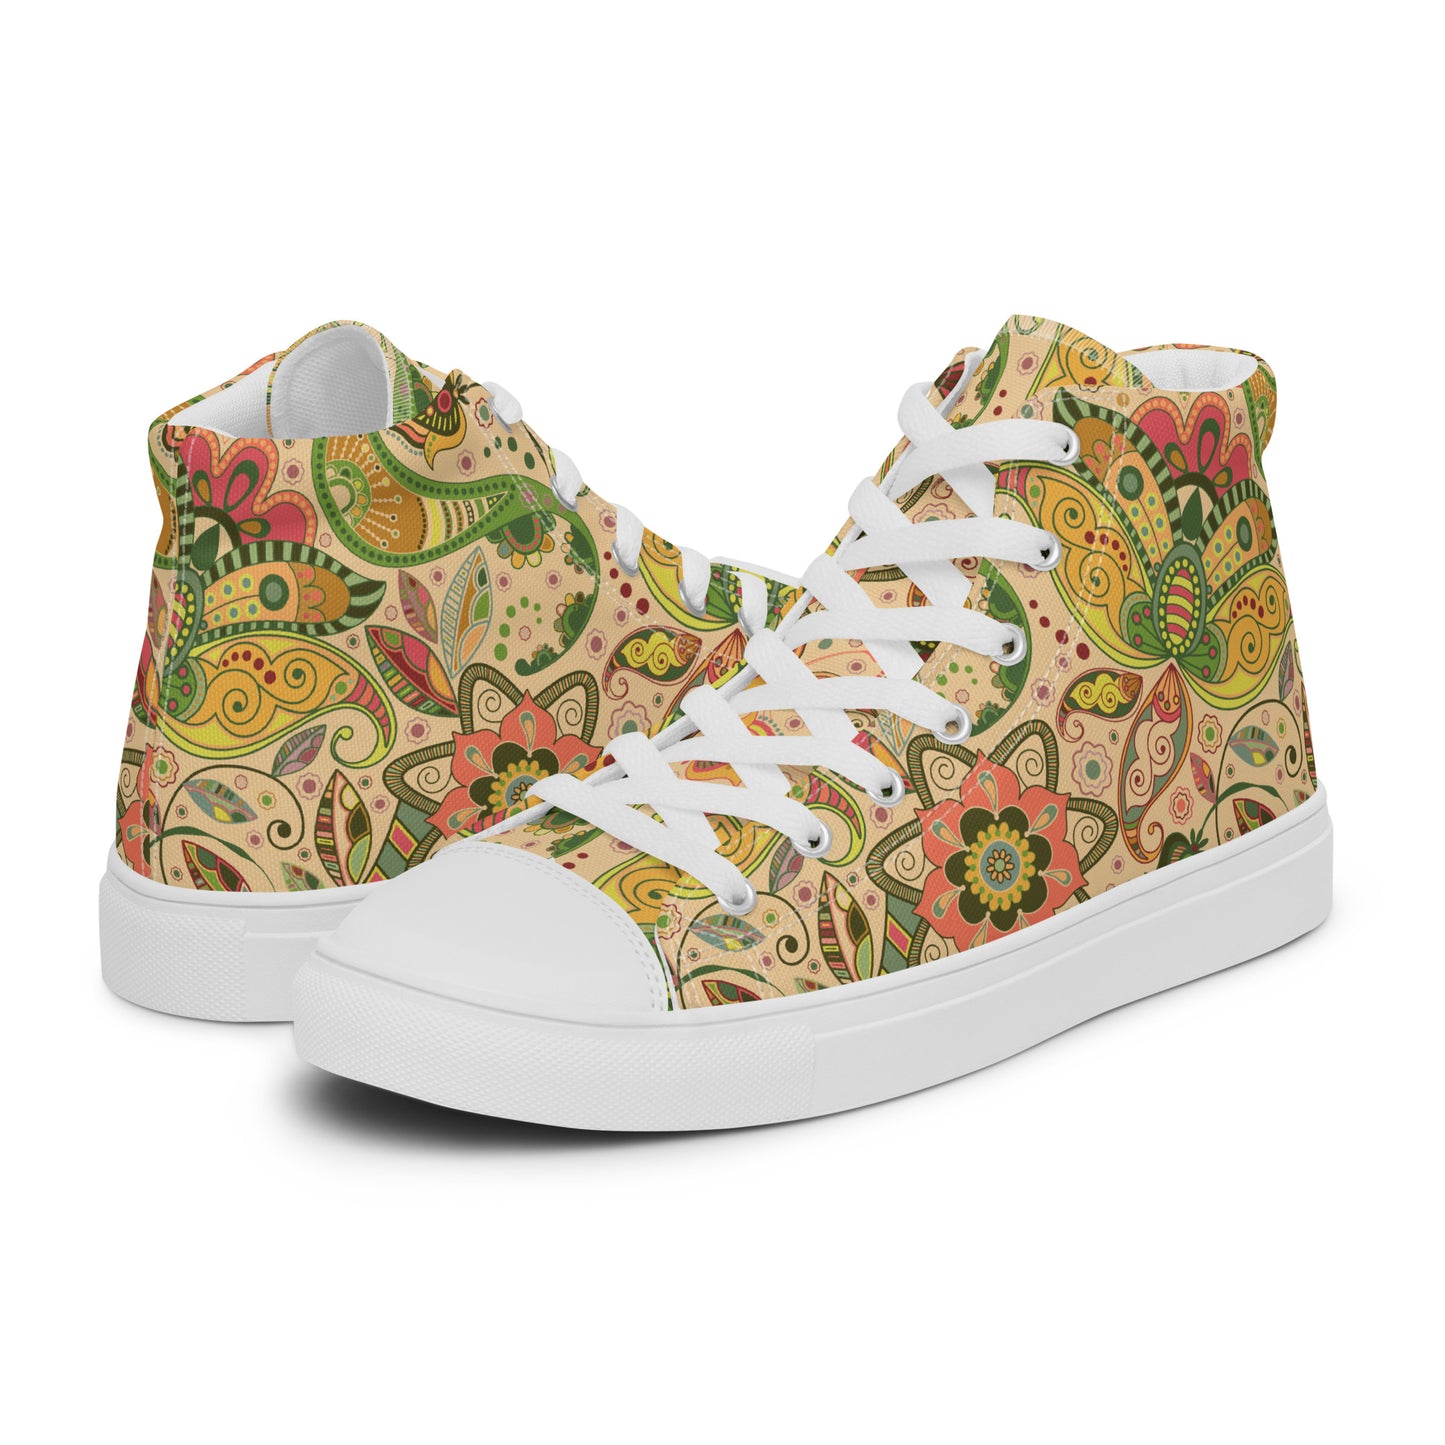 Floral Tribe - Men’s high top canvas shoes